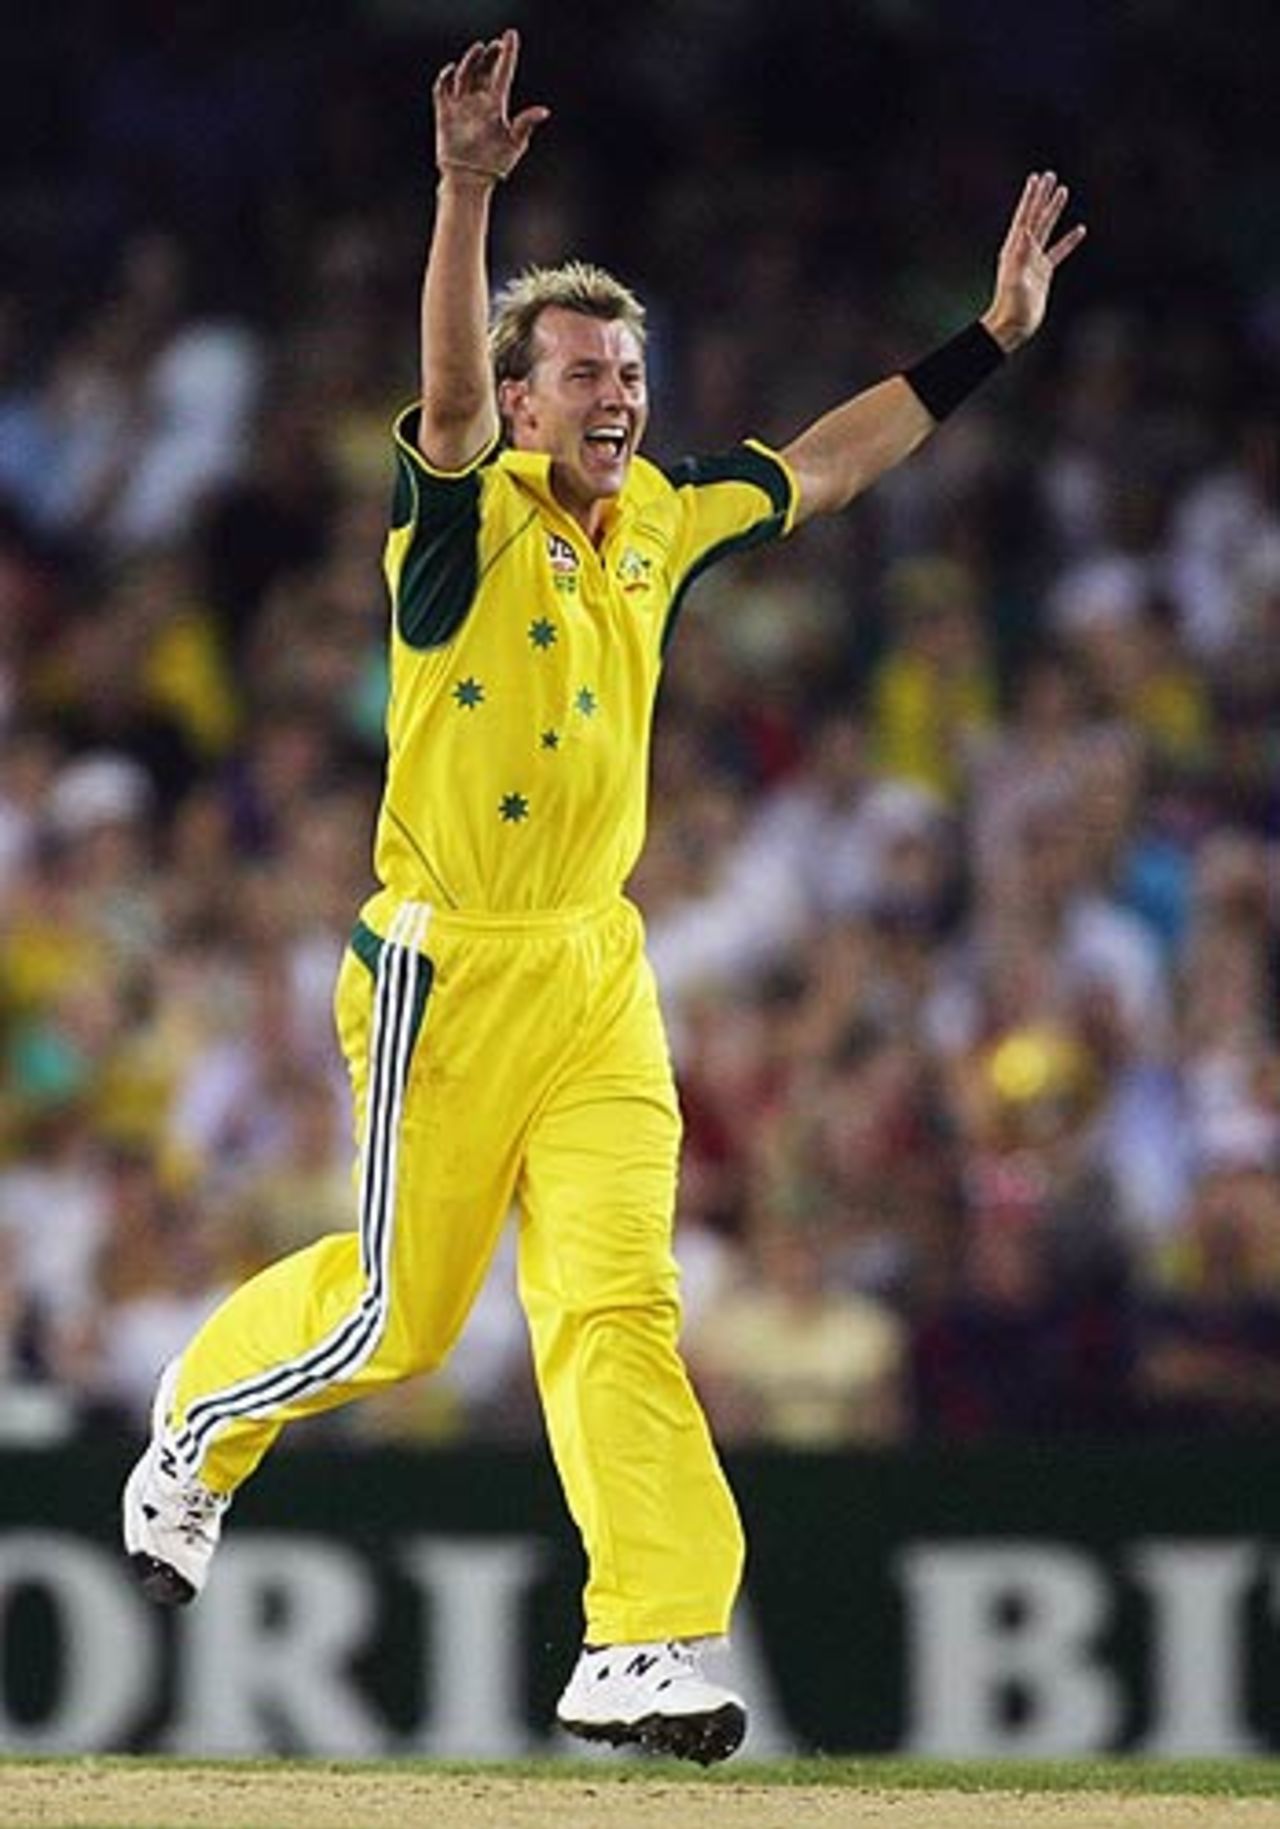 Brett Lee will be raring to go on the pacy Perth pitch